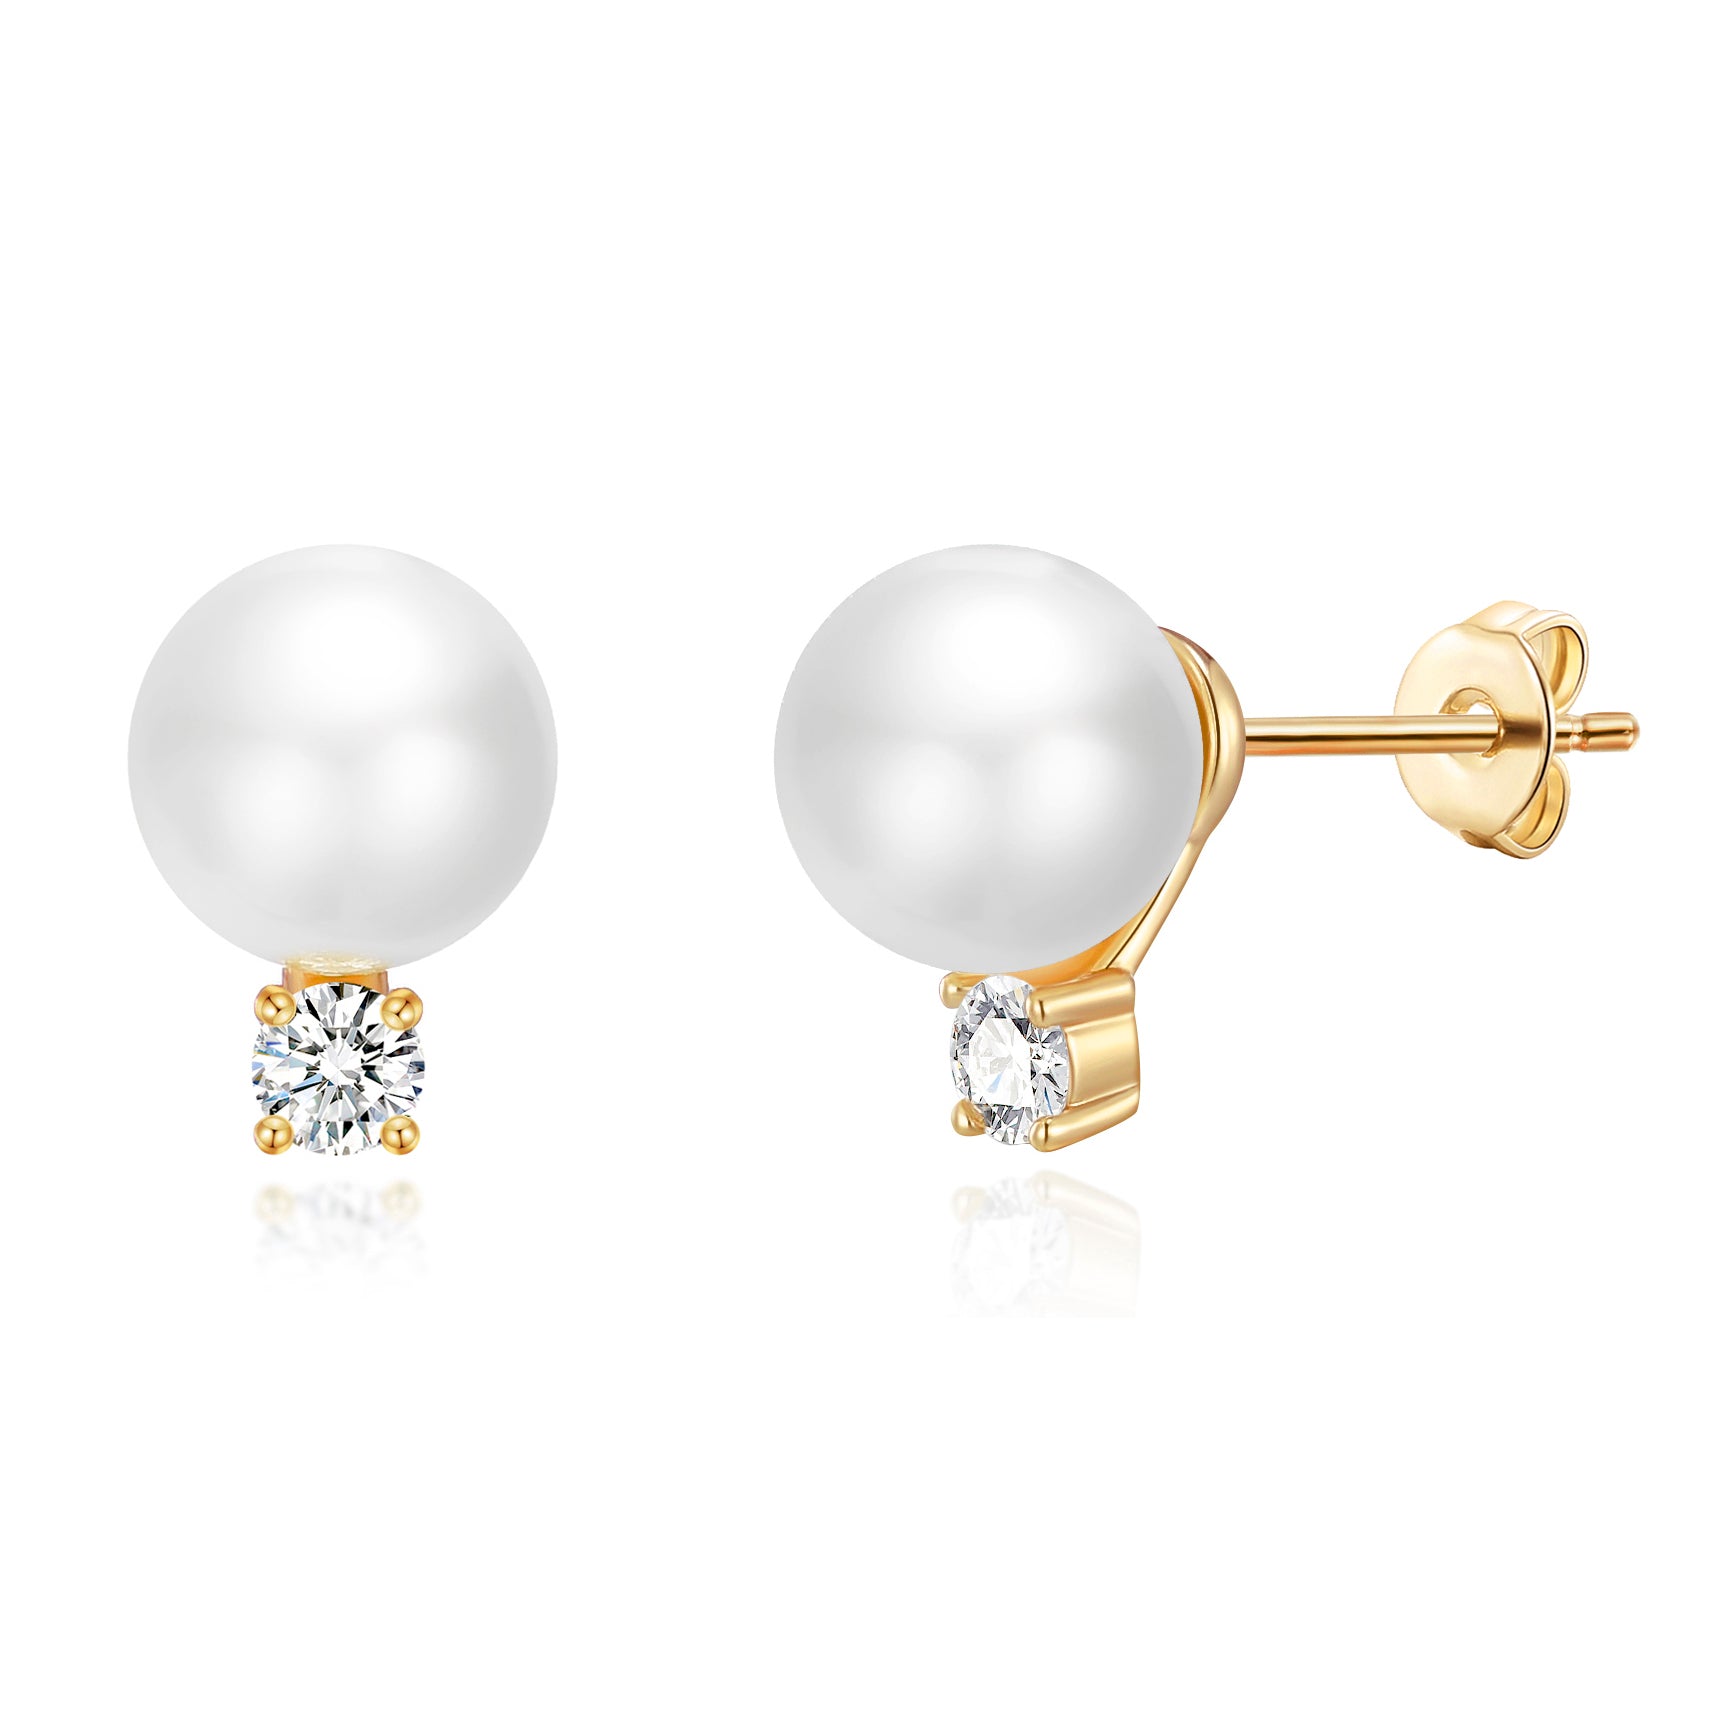 Gold Plated Round Shell Pearl Earrings Created with Zircondia® Crystals by Philip Jones Jewellery